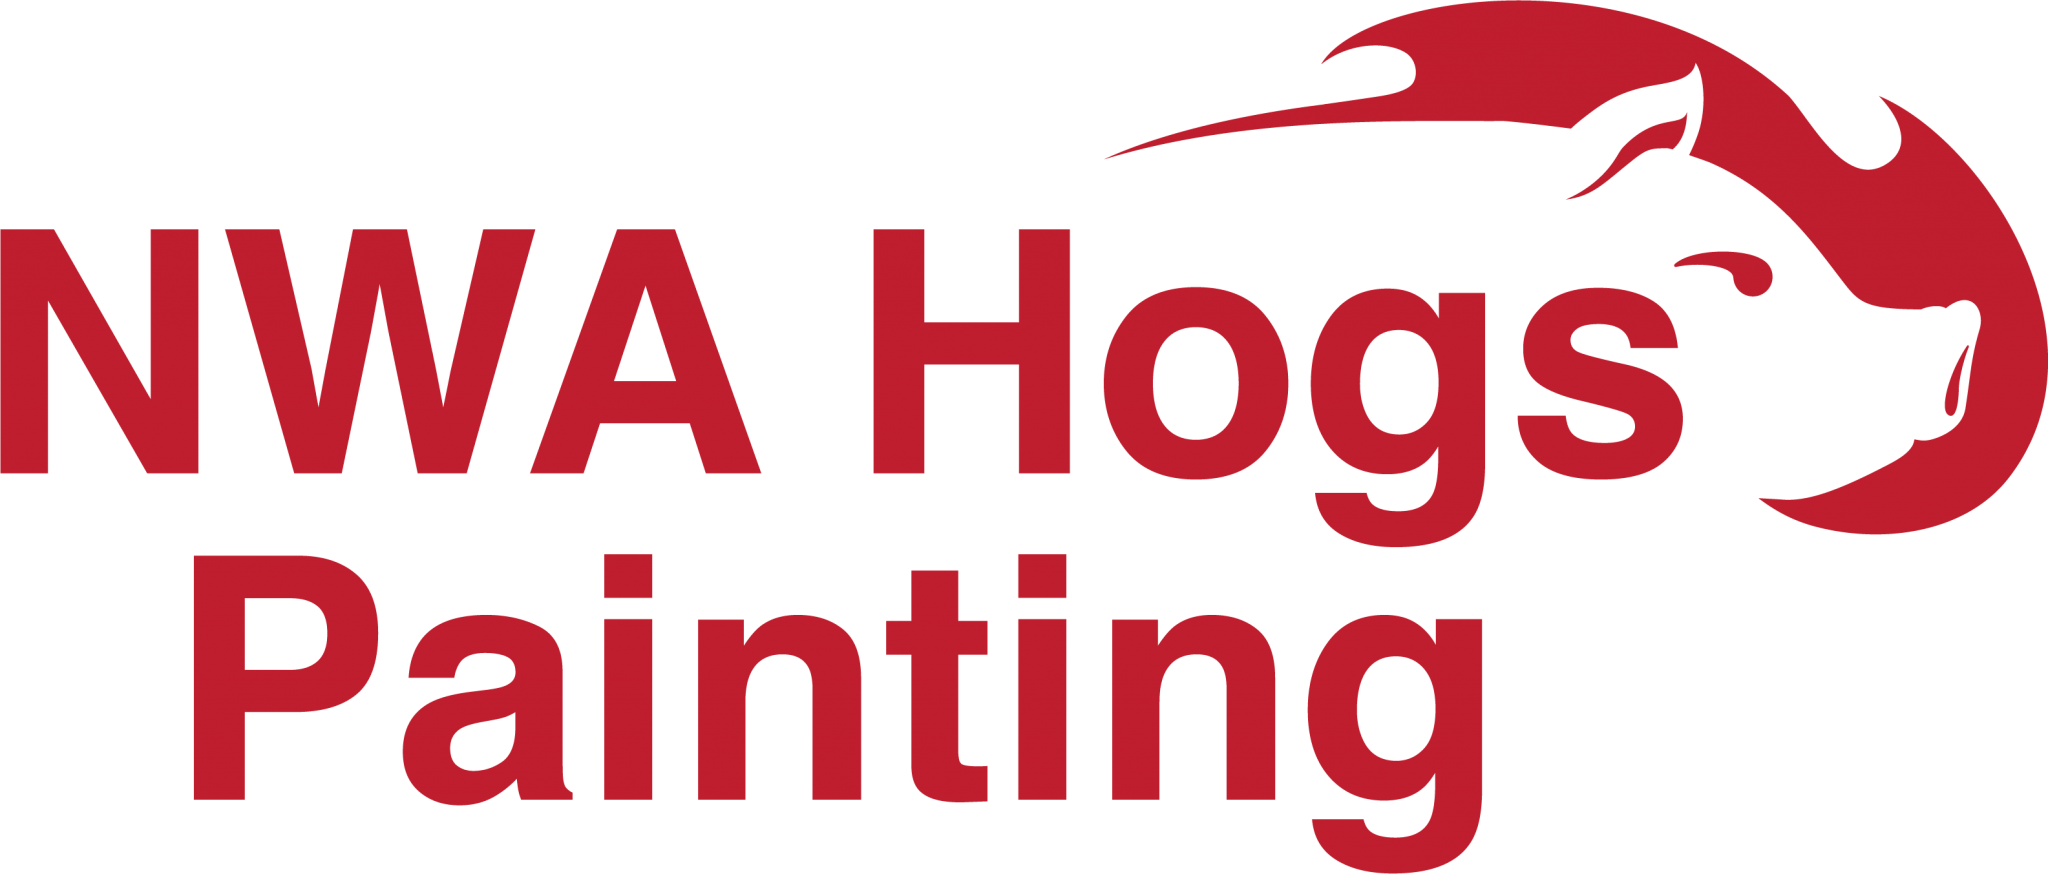 NWA Hogs Painting in Bentonville, AR Highlights Top Reasons to Hire a Professional Painter Over DIY